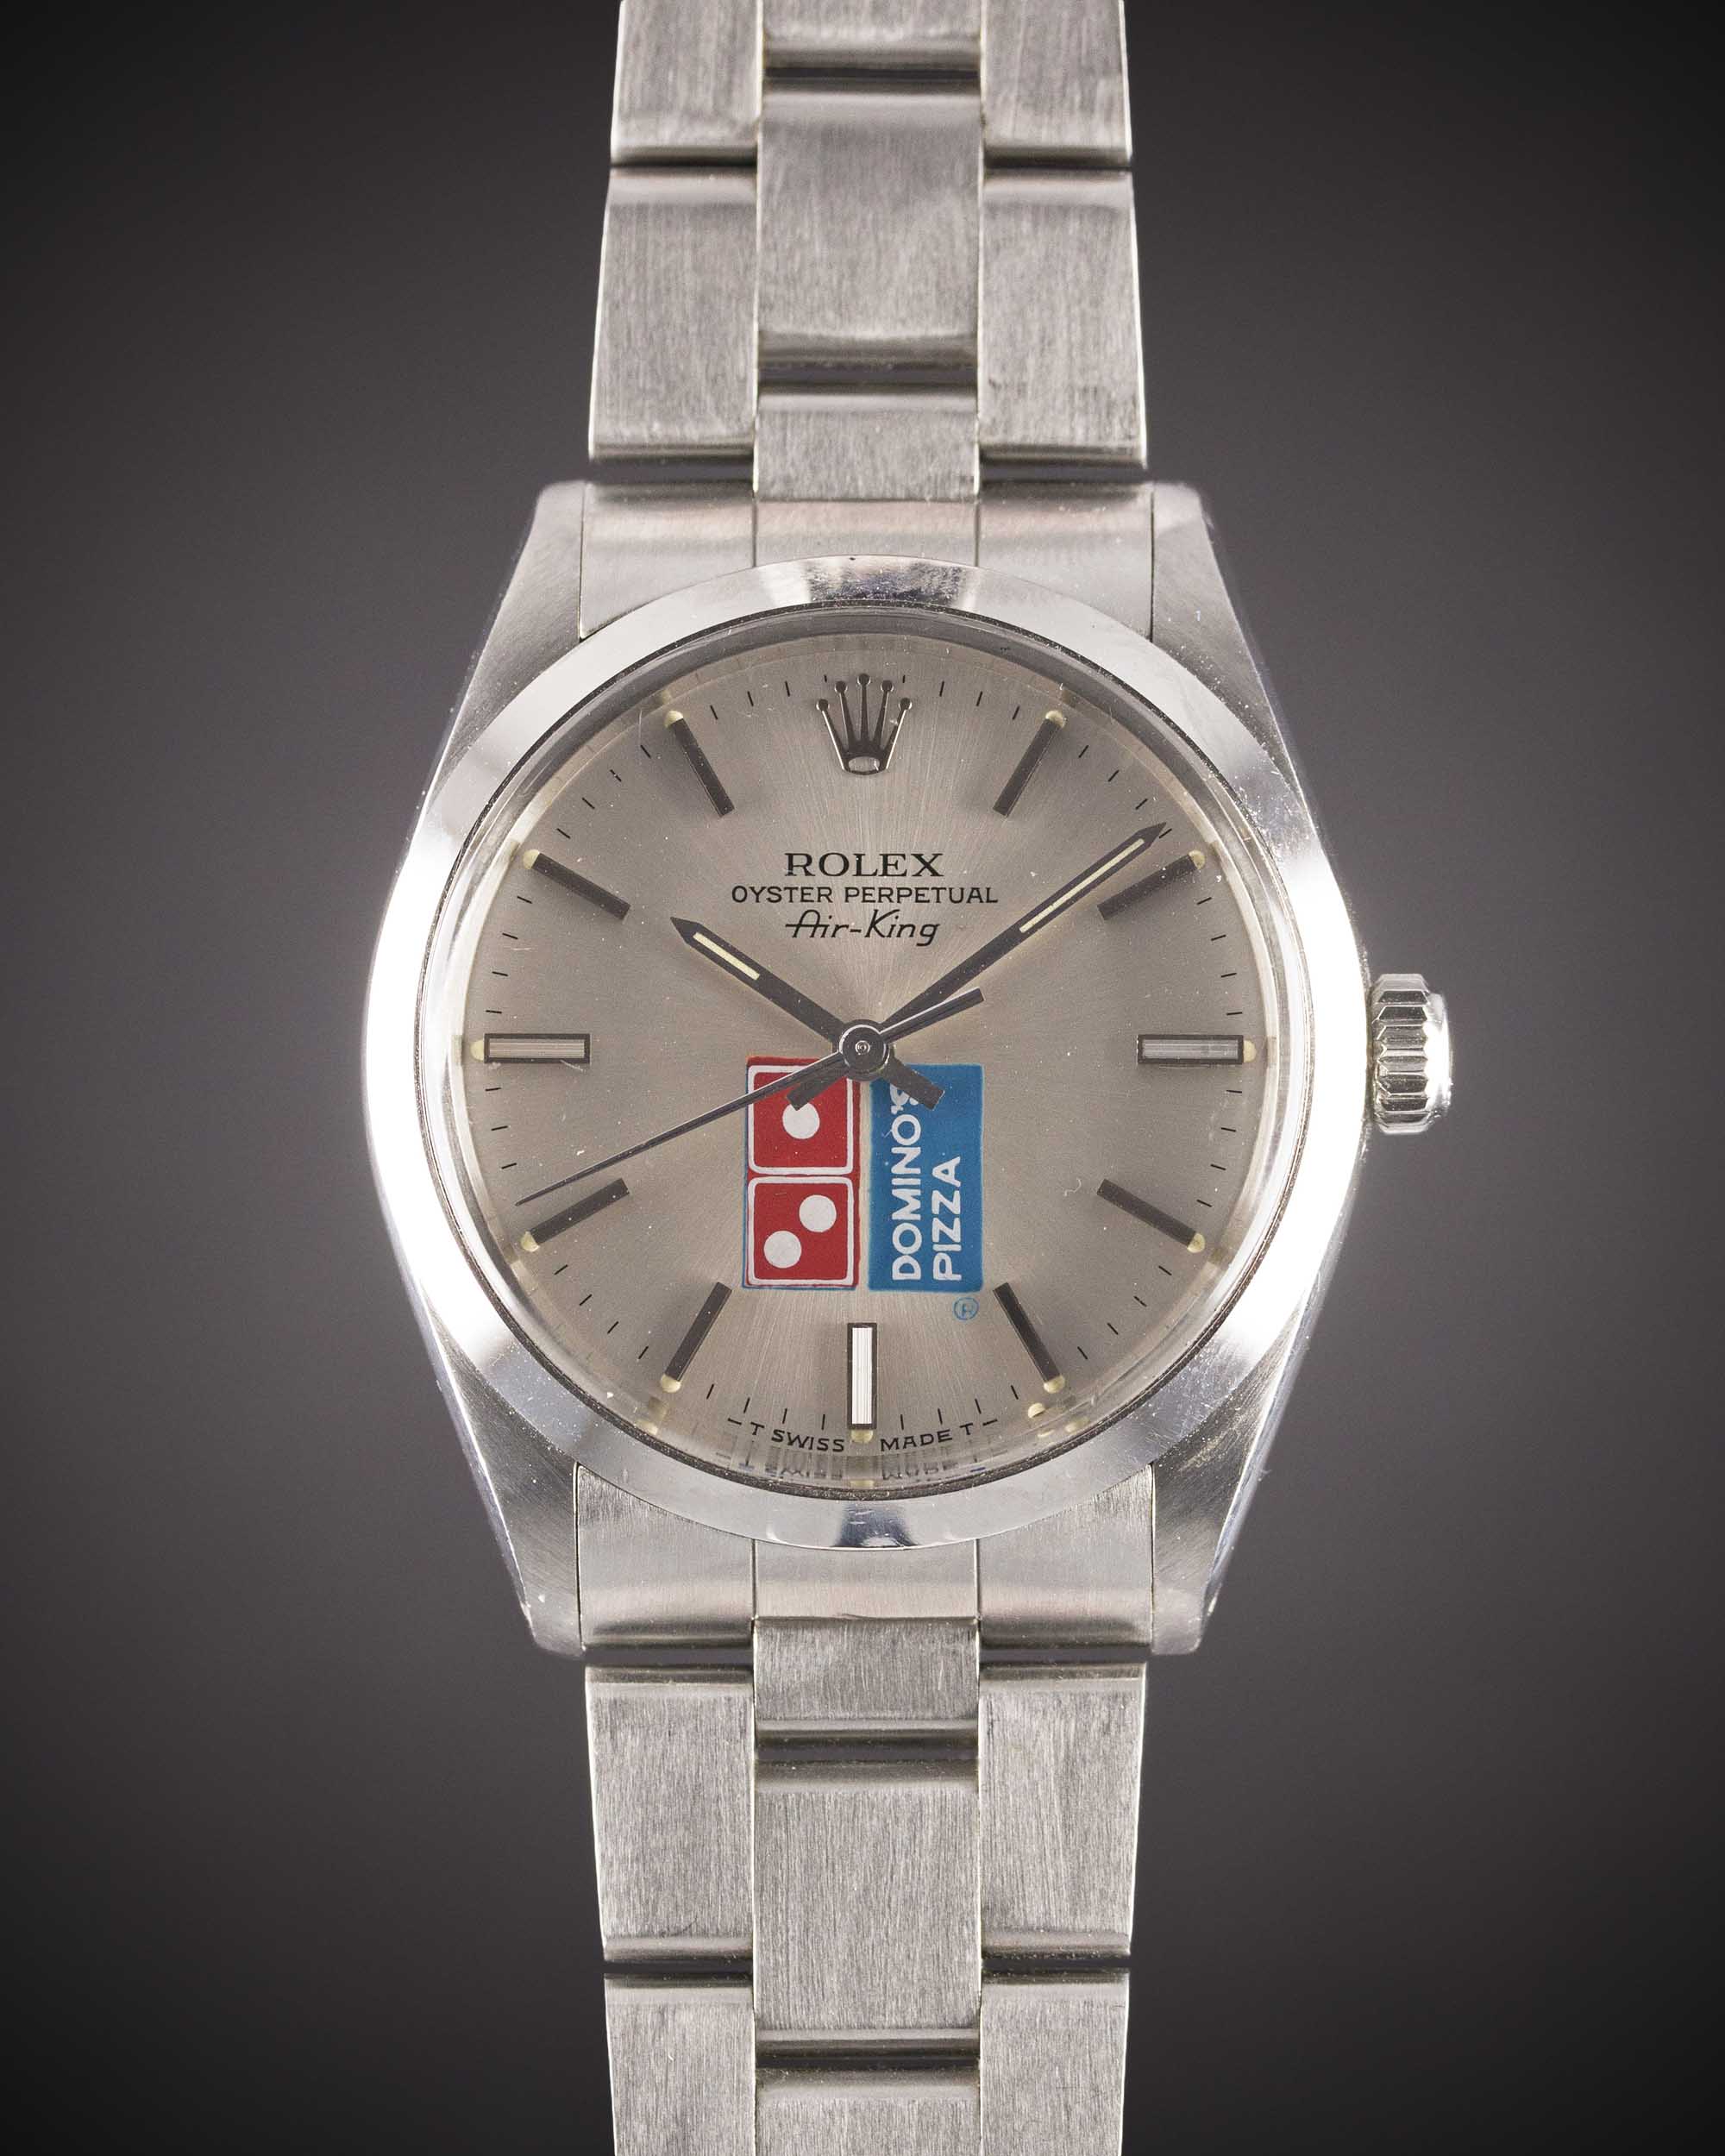 A RARE GENTLEMAN'S STAINLESS STEEL ROLEX OYSTER PERPETUAL AIR KING BRACELET WATCH CIRCA 1989, REF. - Image 2 of 11